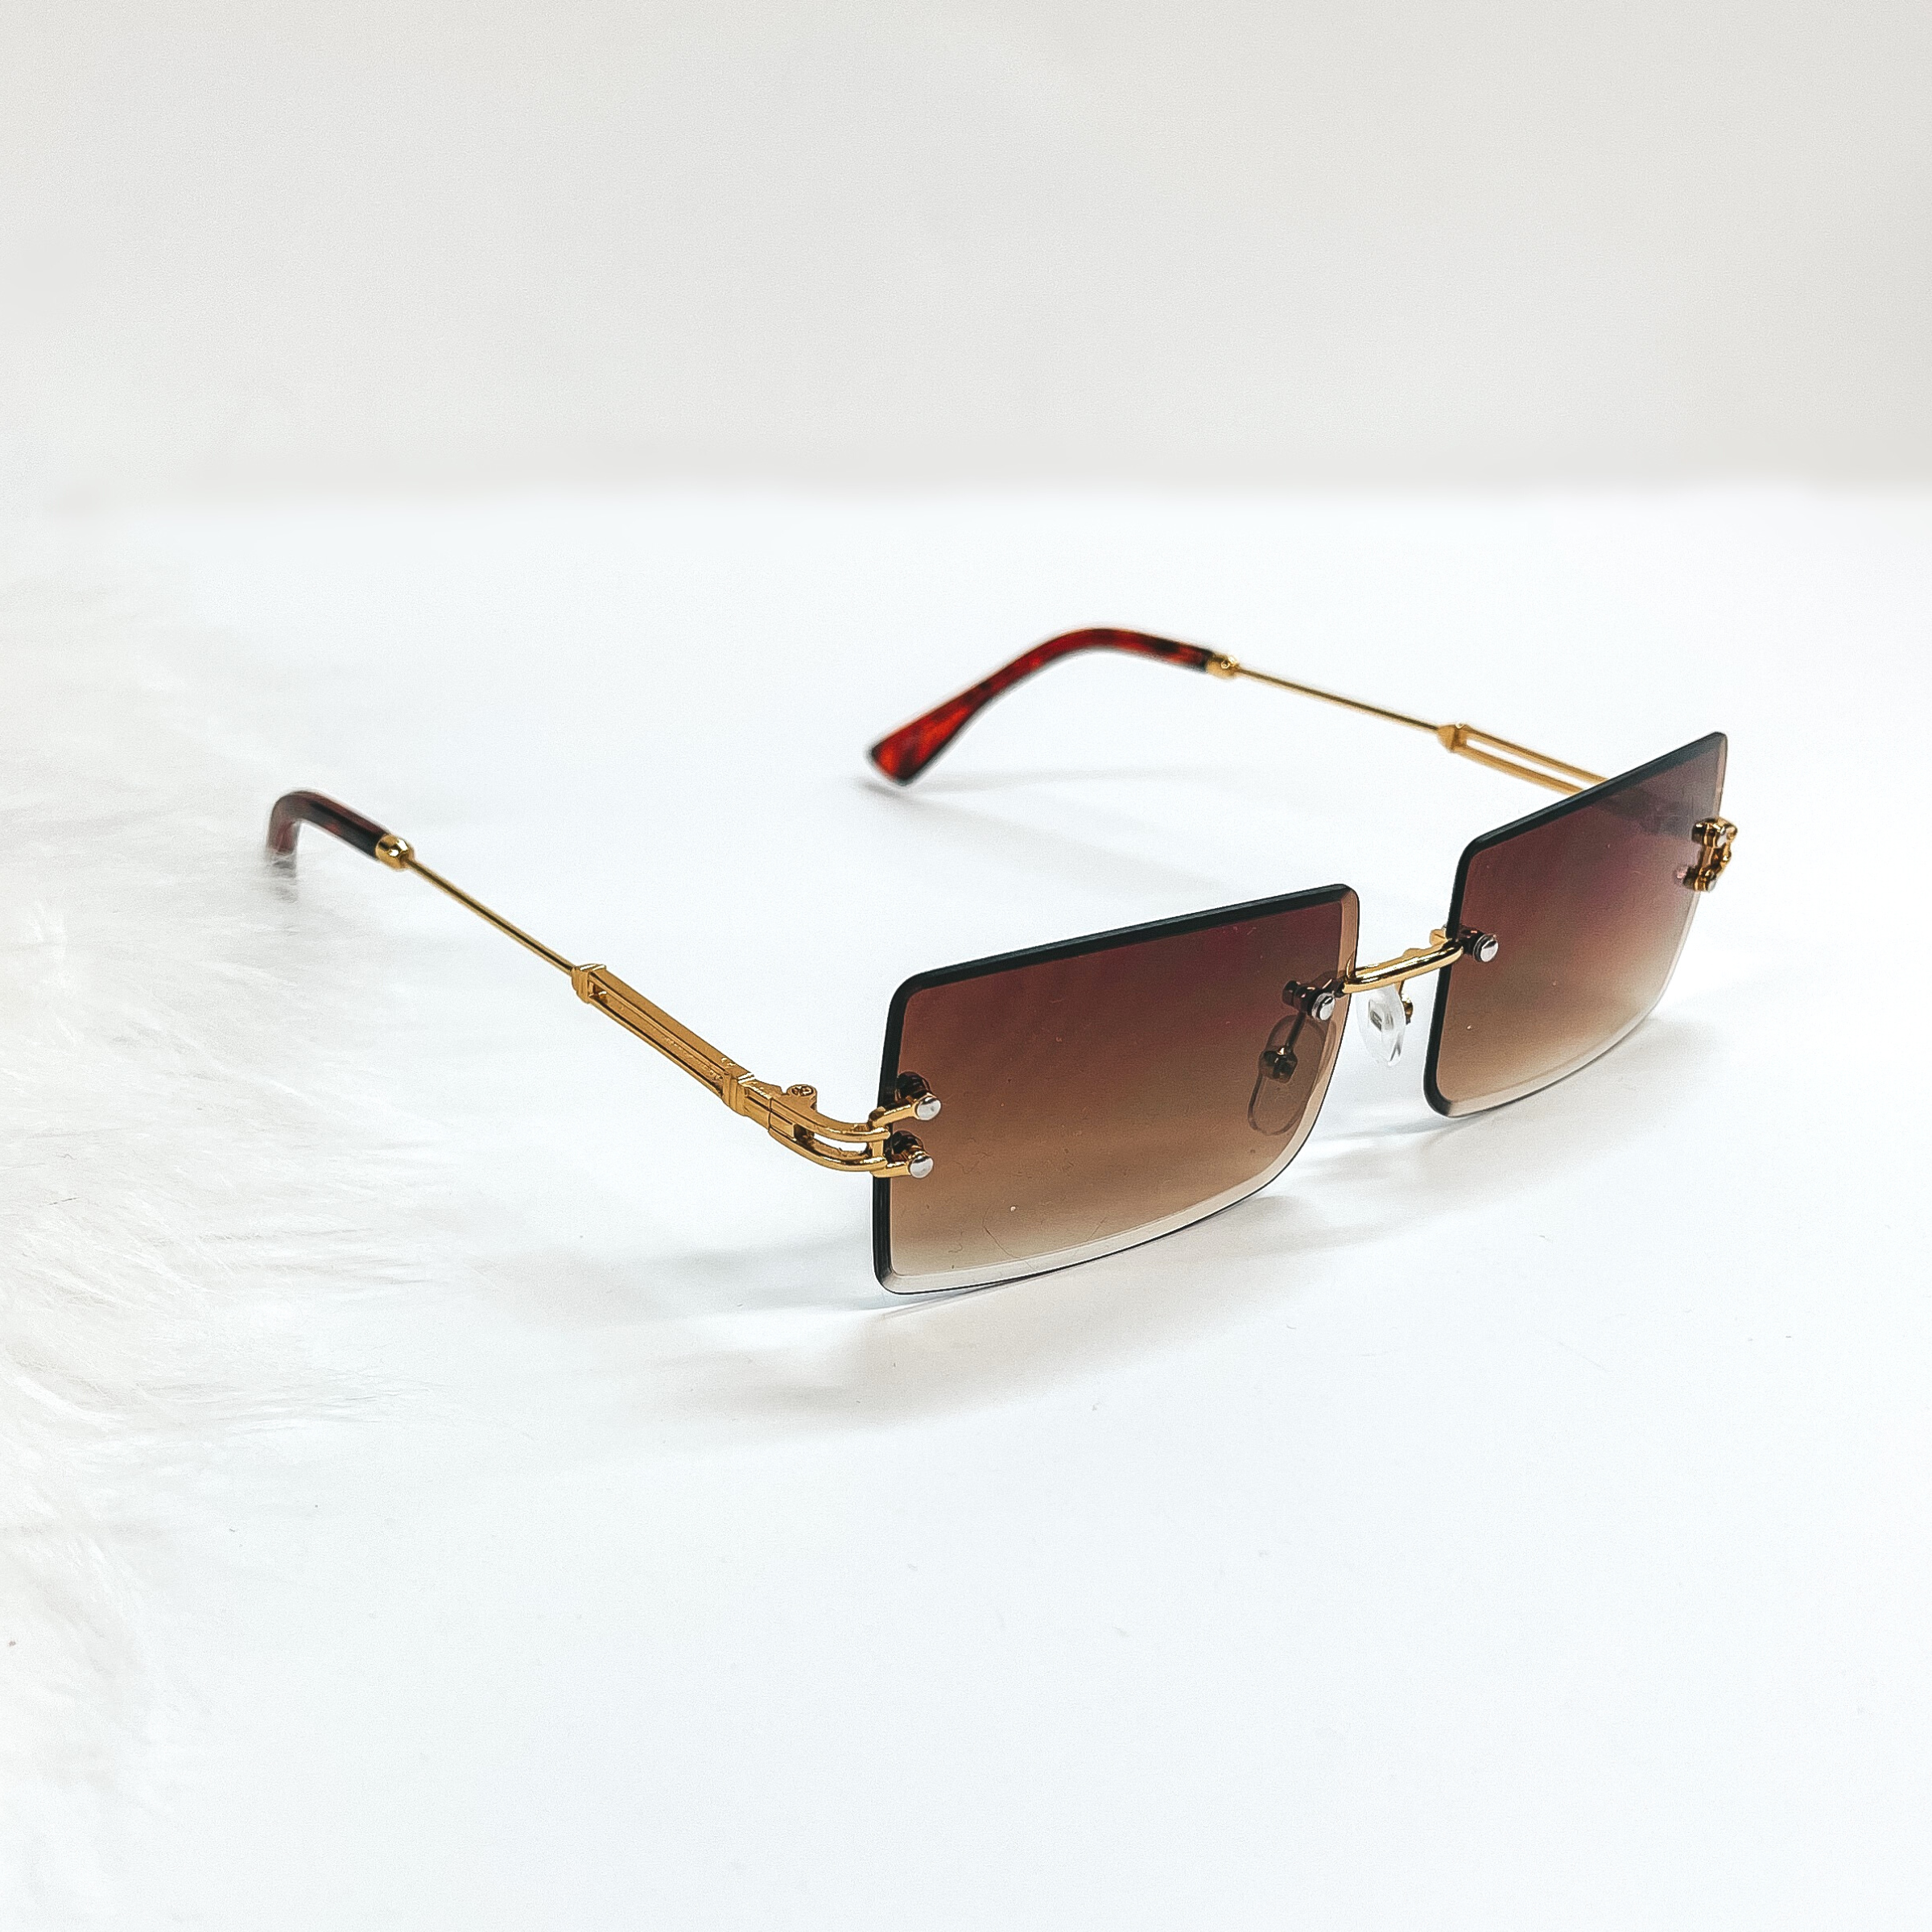 This is a brown pair of sunglasses, the lenses are brown with no frame and they have  gold connextors. The ear pieces are tortuoise print. These sunglasses are taken  on a white background with a piece of white fur in the side as decor.